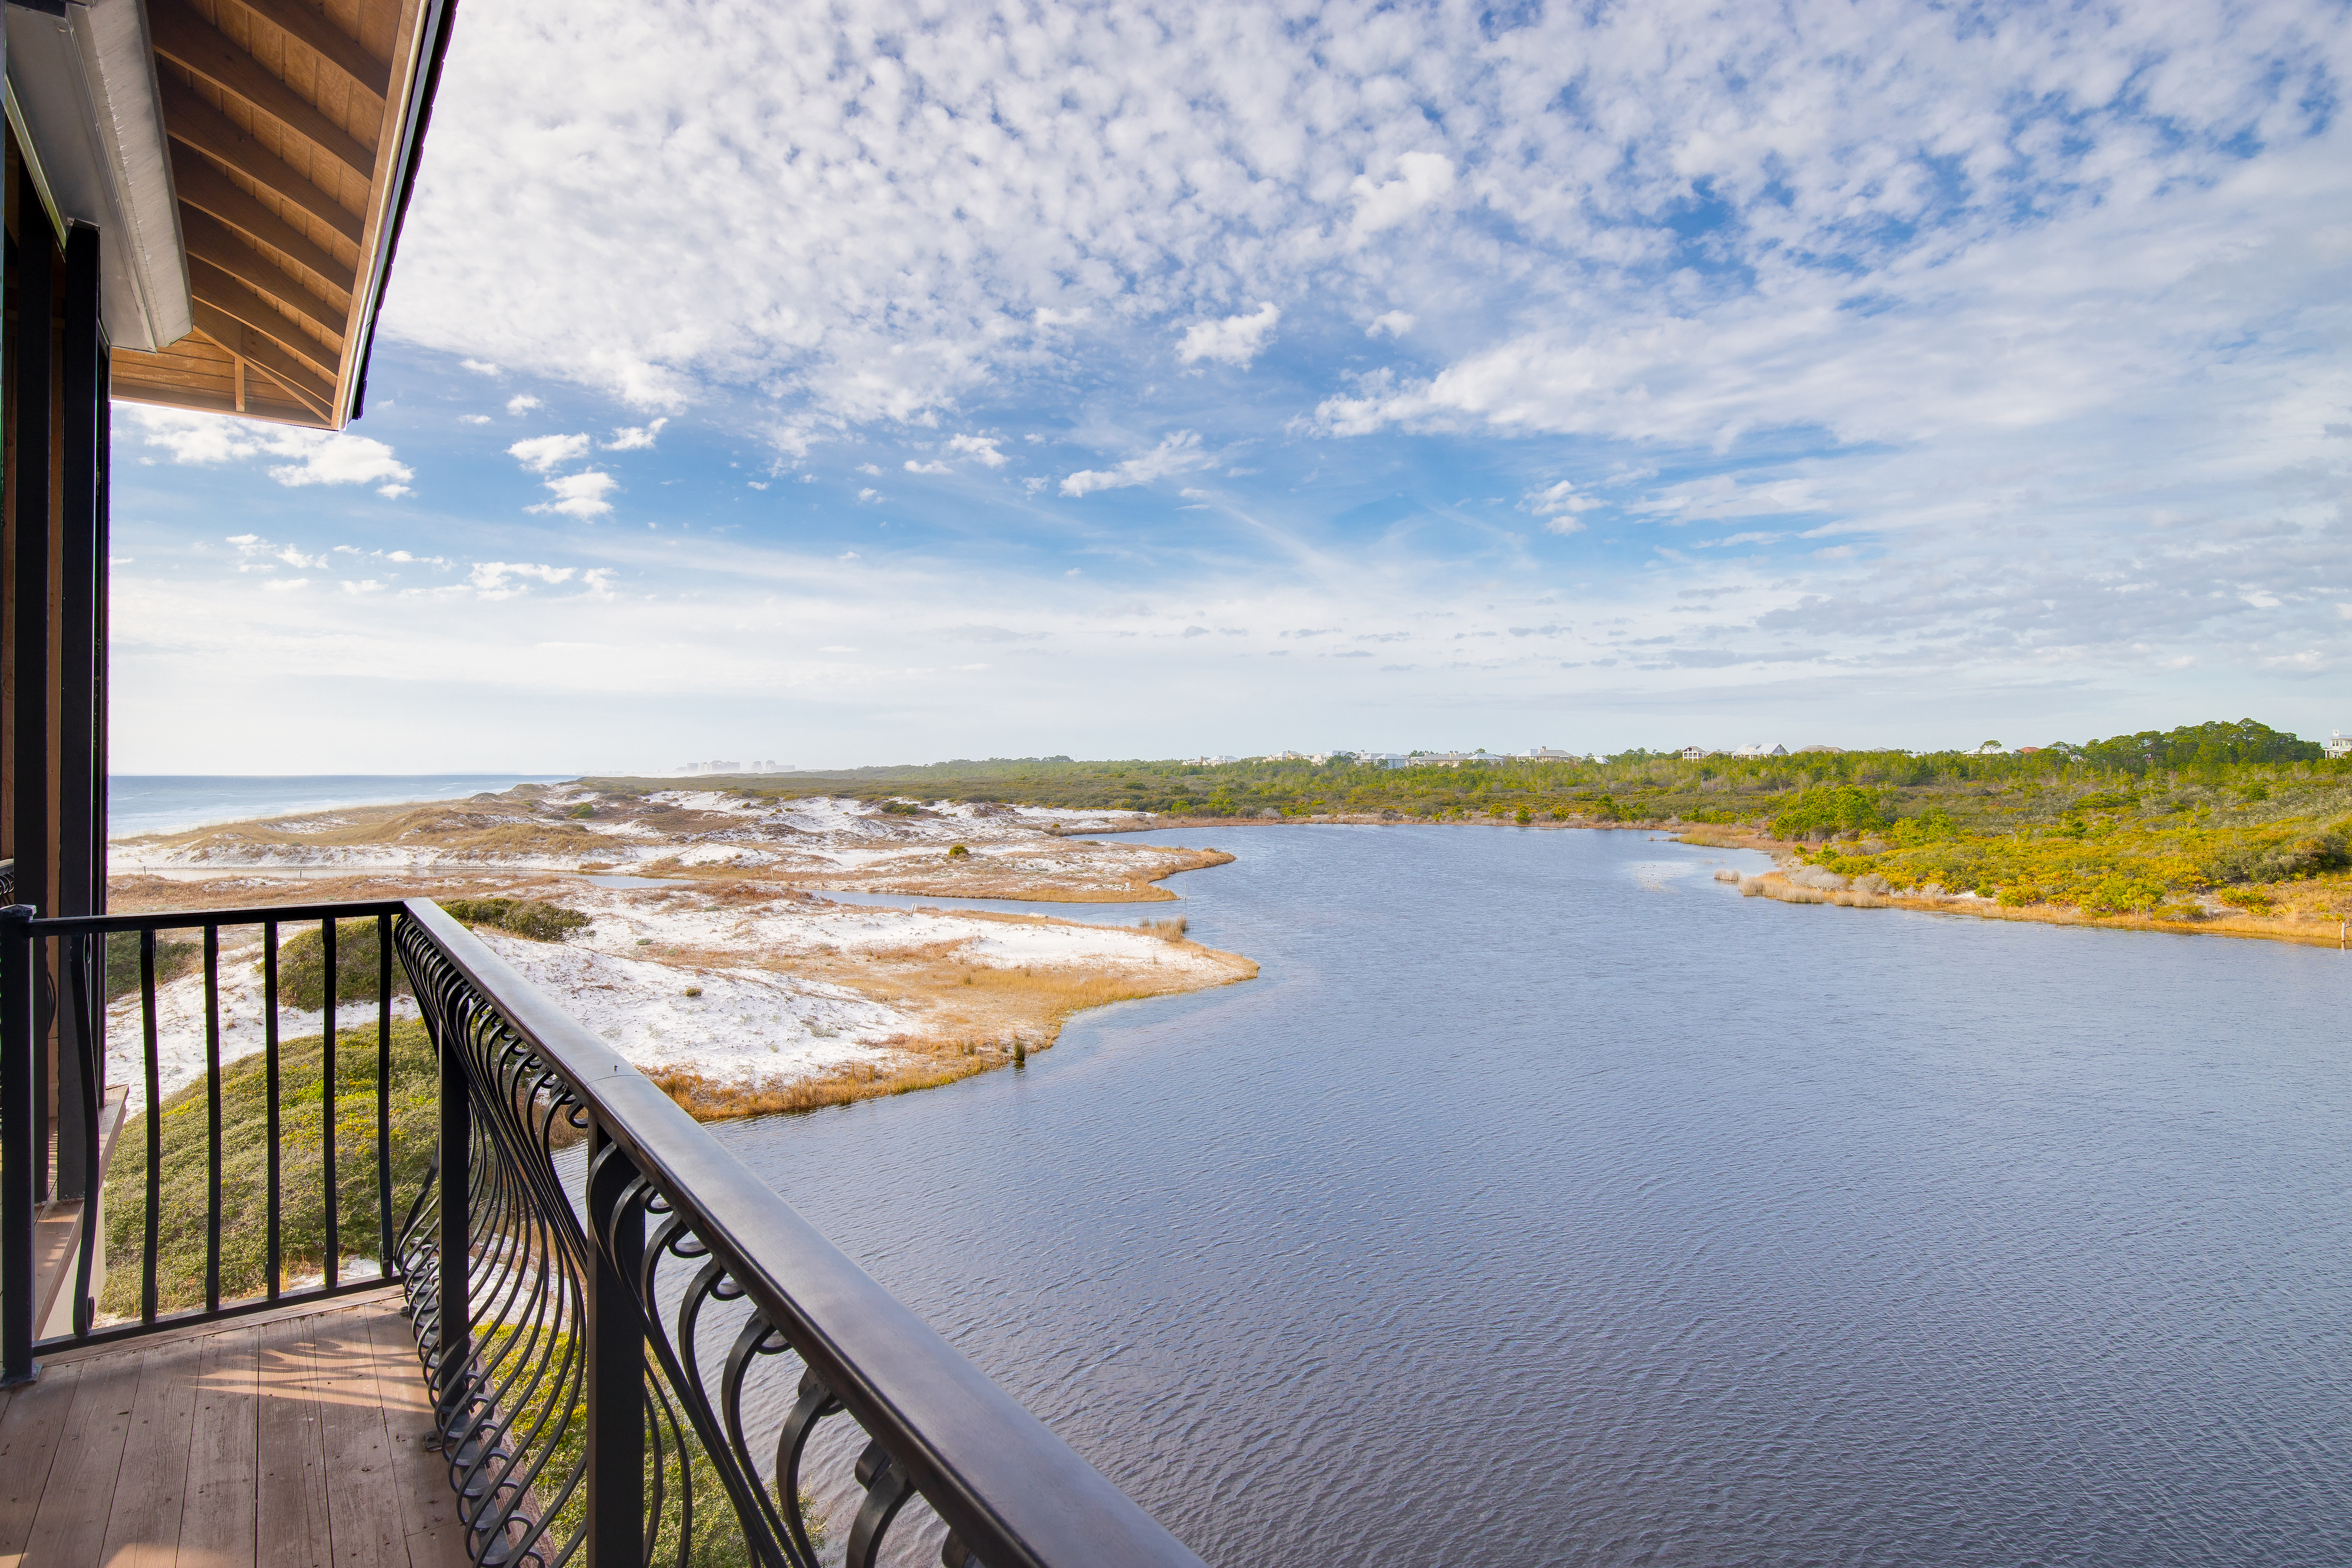 A view of Stallworth Lake from the balcony of a home framed by the beach